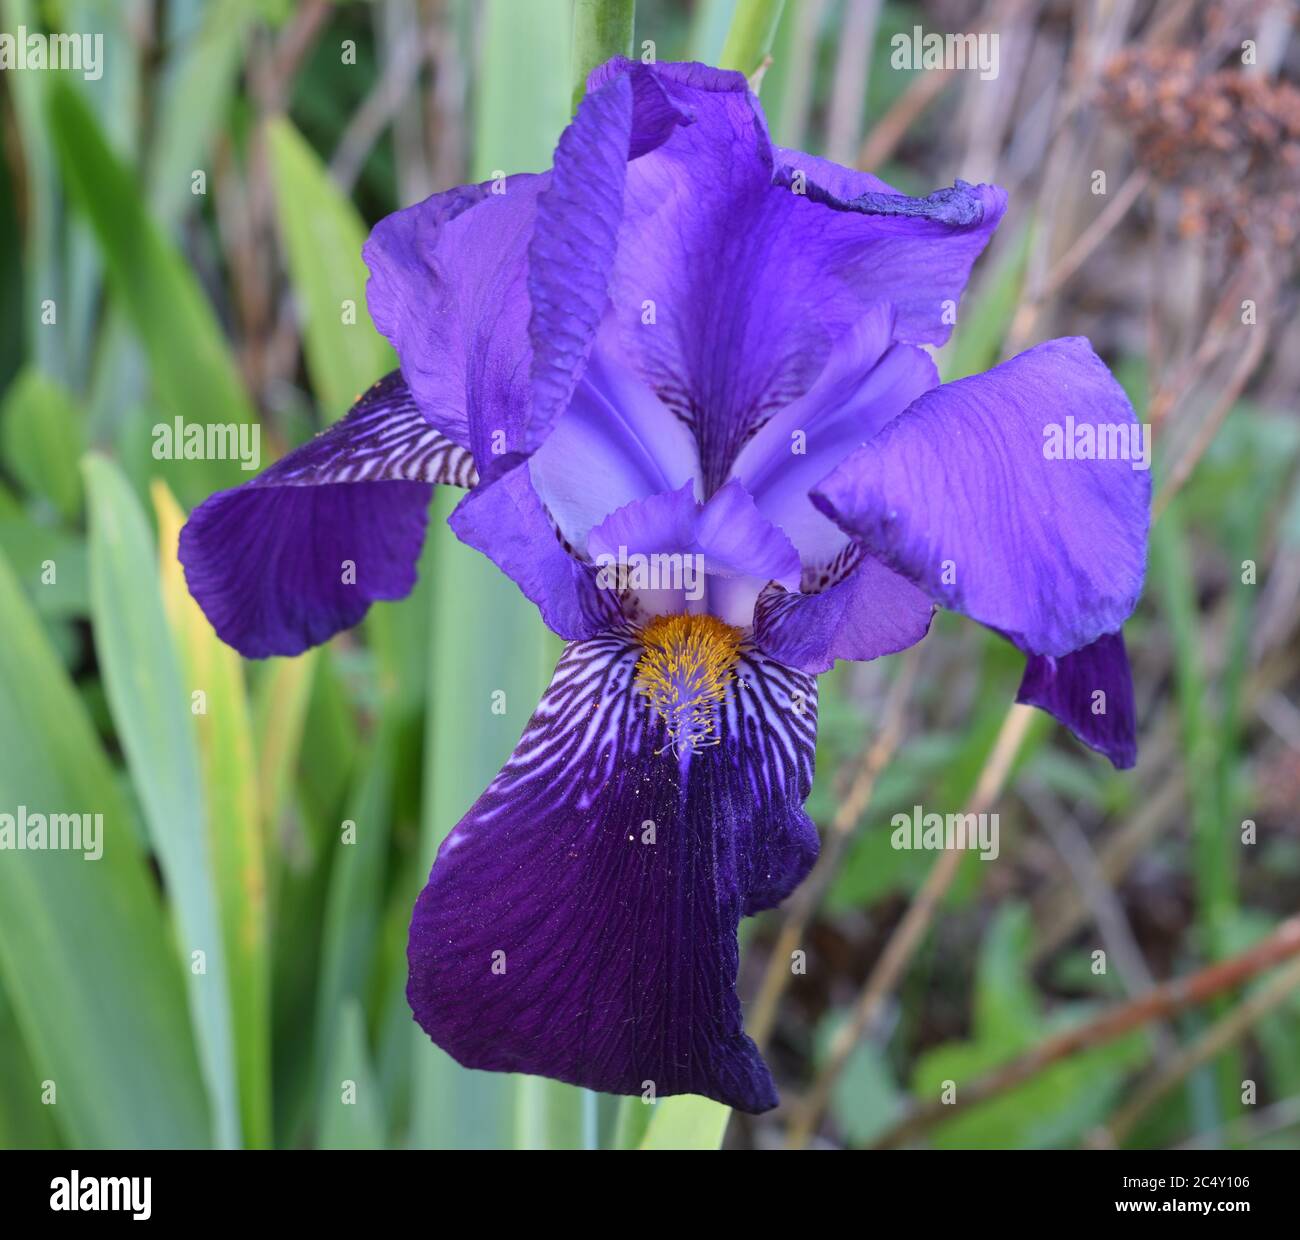 Old English Purple Iris. Close up of a large flower with yellow stamens and white stipes on blue petals. Stock Photo